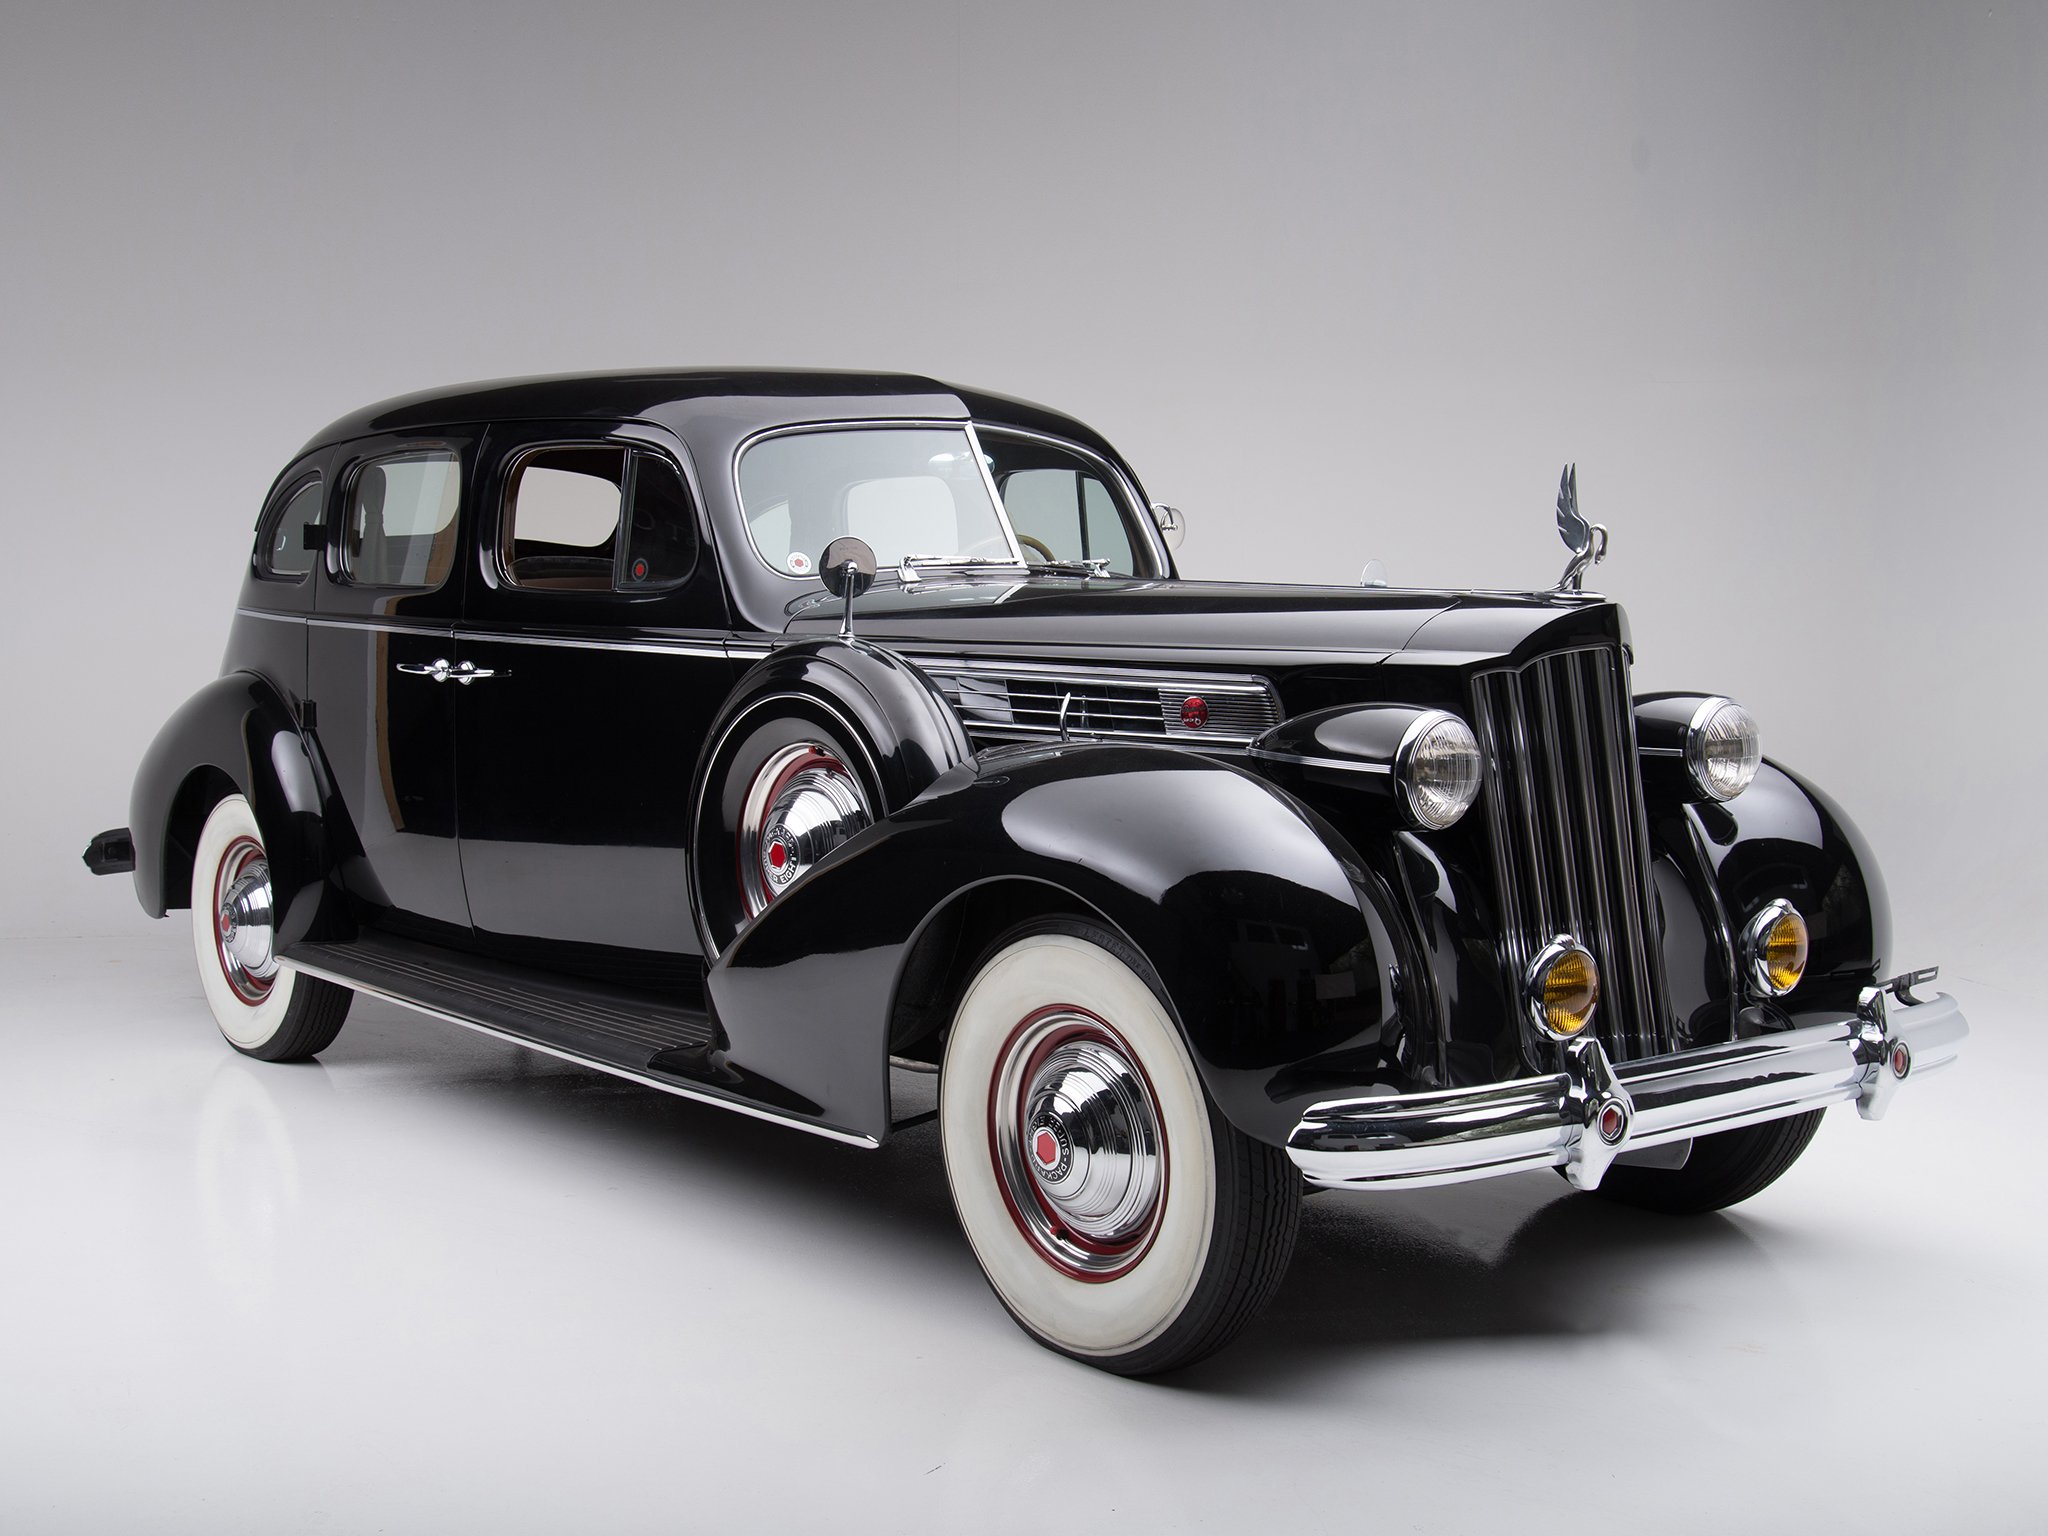 1939 Packard 12 Cylinder Sedan Convertible High Quality Background on Wallpapers Vista